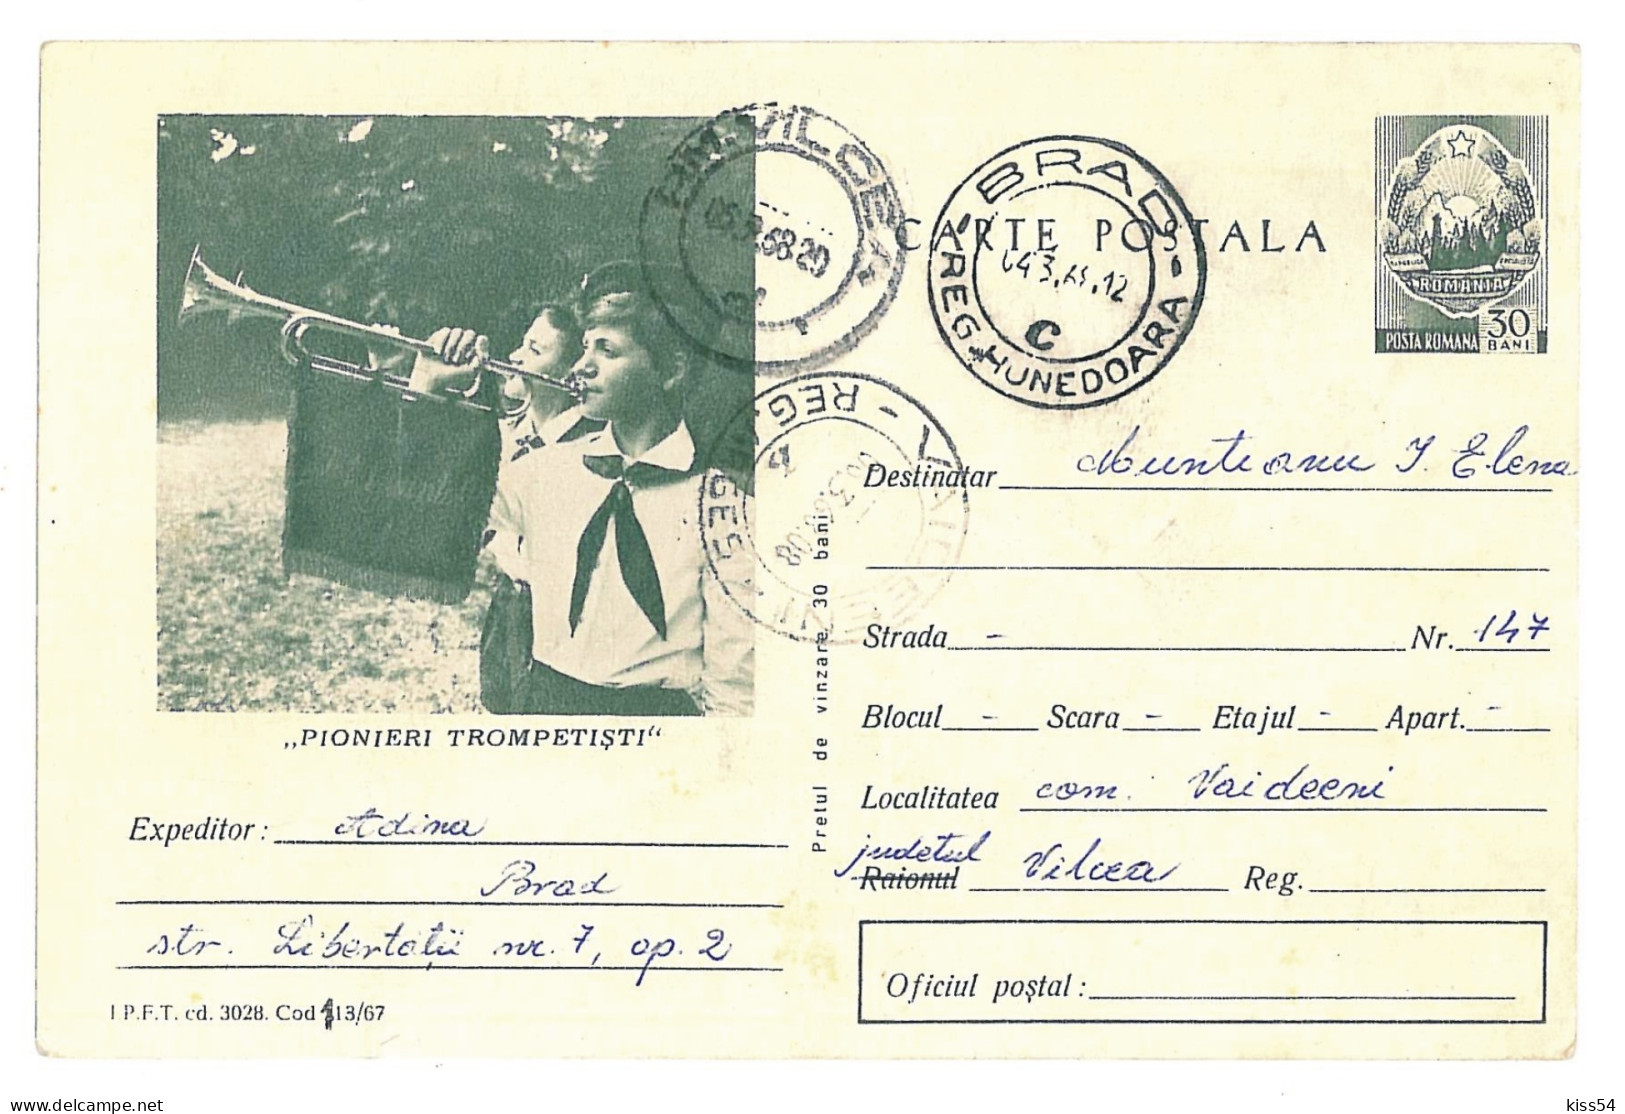 IP 67 - 0113 SCOUTS, Romania - Stationery - Used - 1967 - Postal Stationery